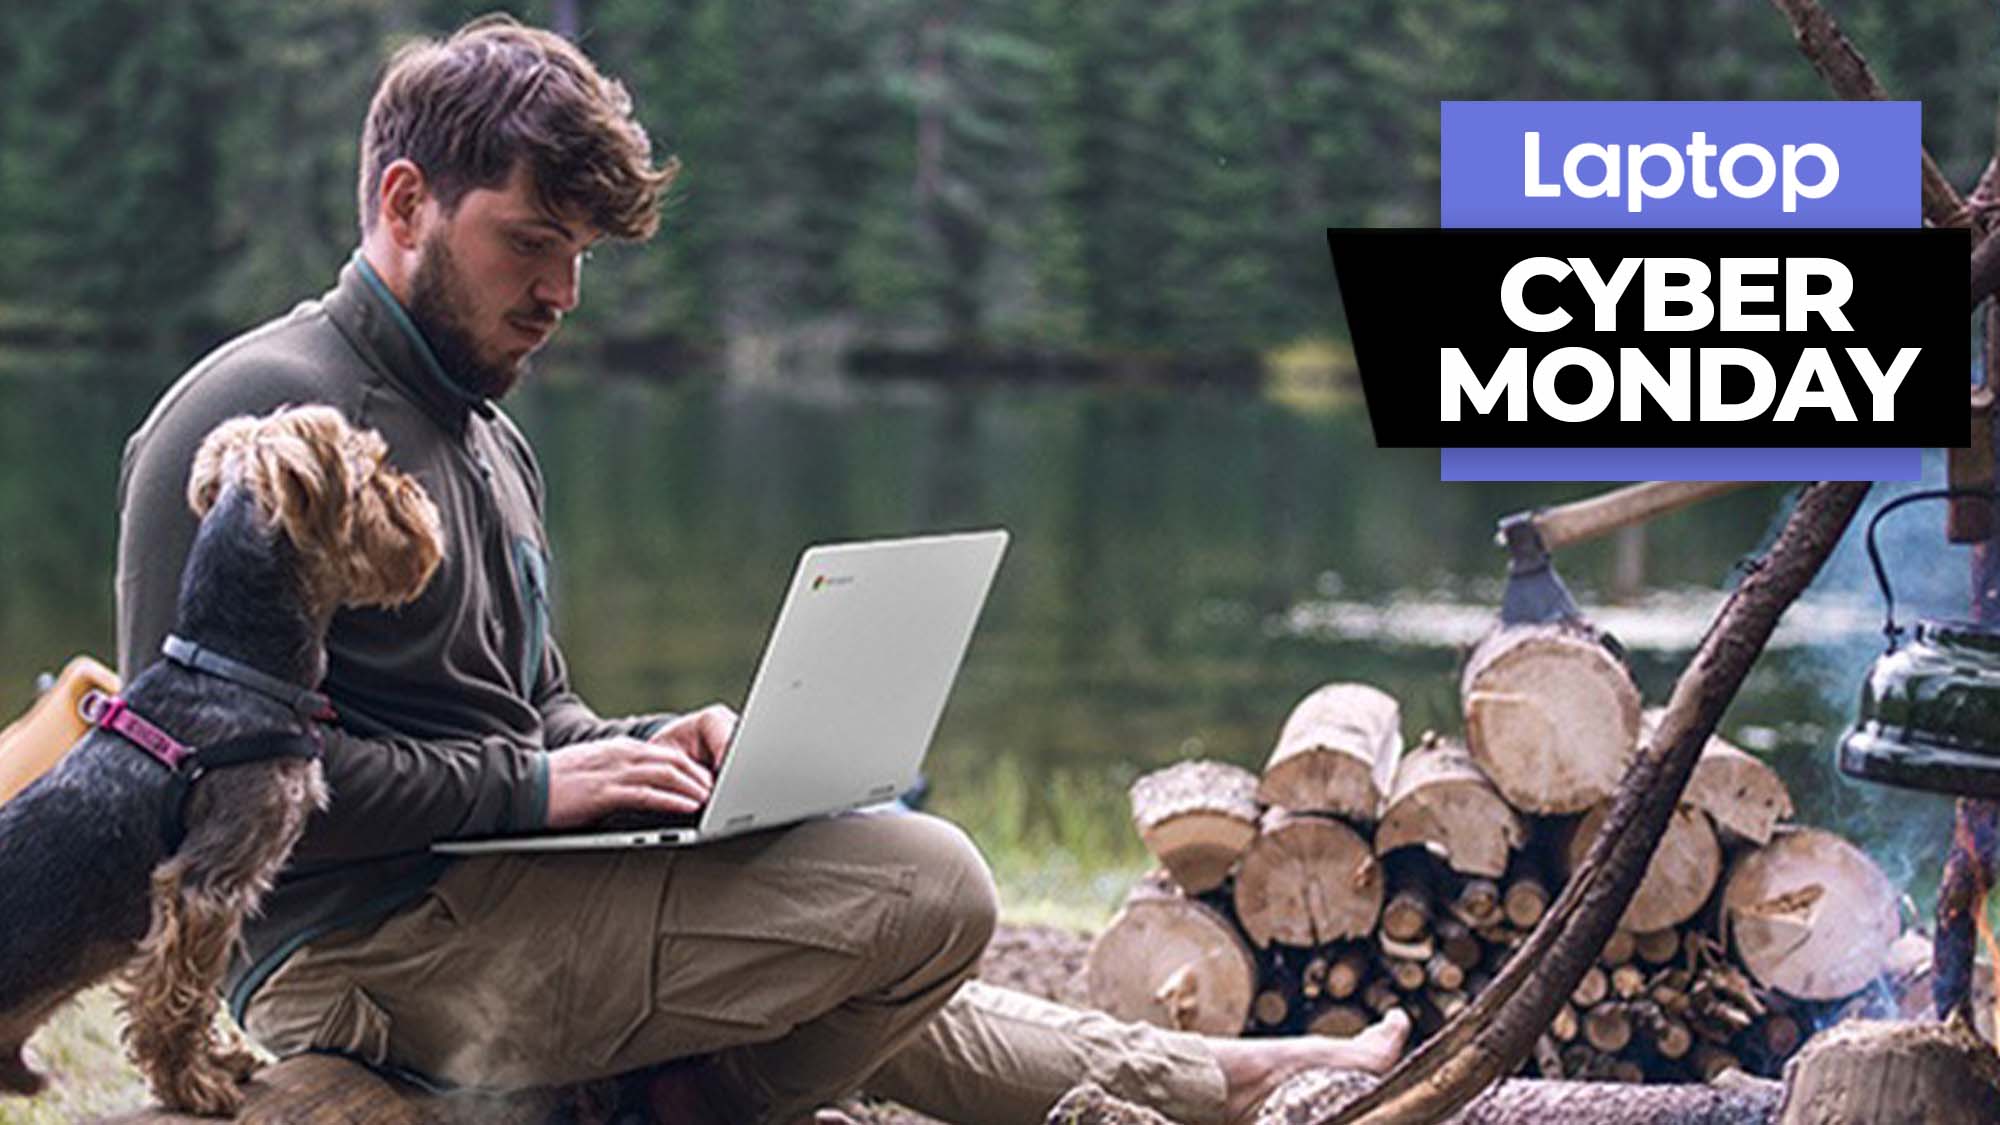 A Samsung Galaxy Chromebook 2 360 laptop is being used with a dog and a man sitting by the fire